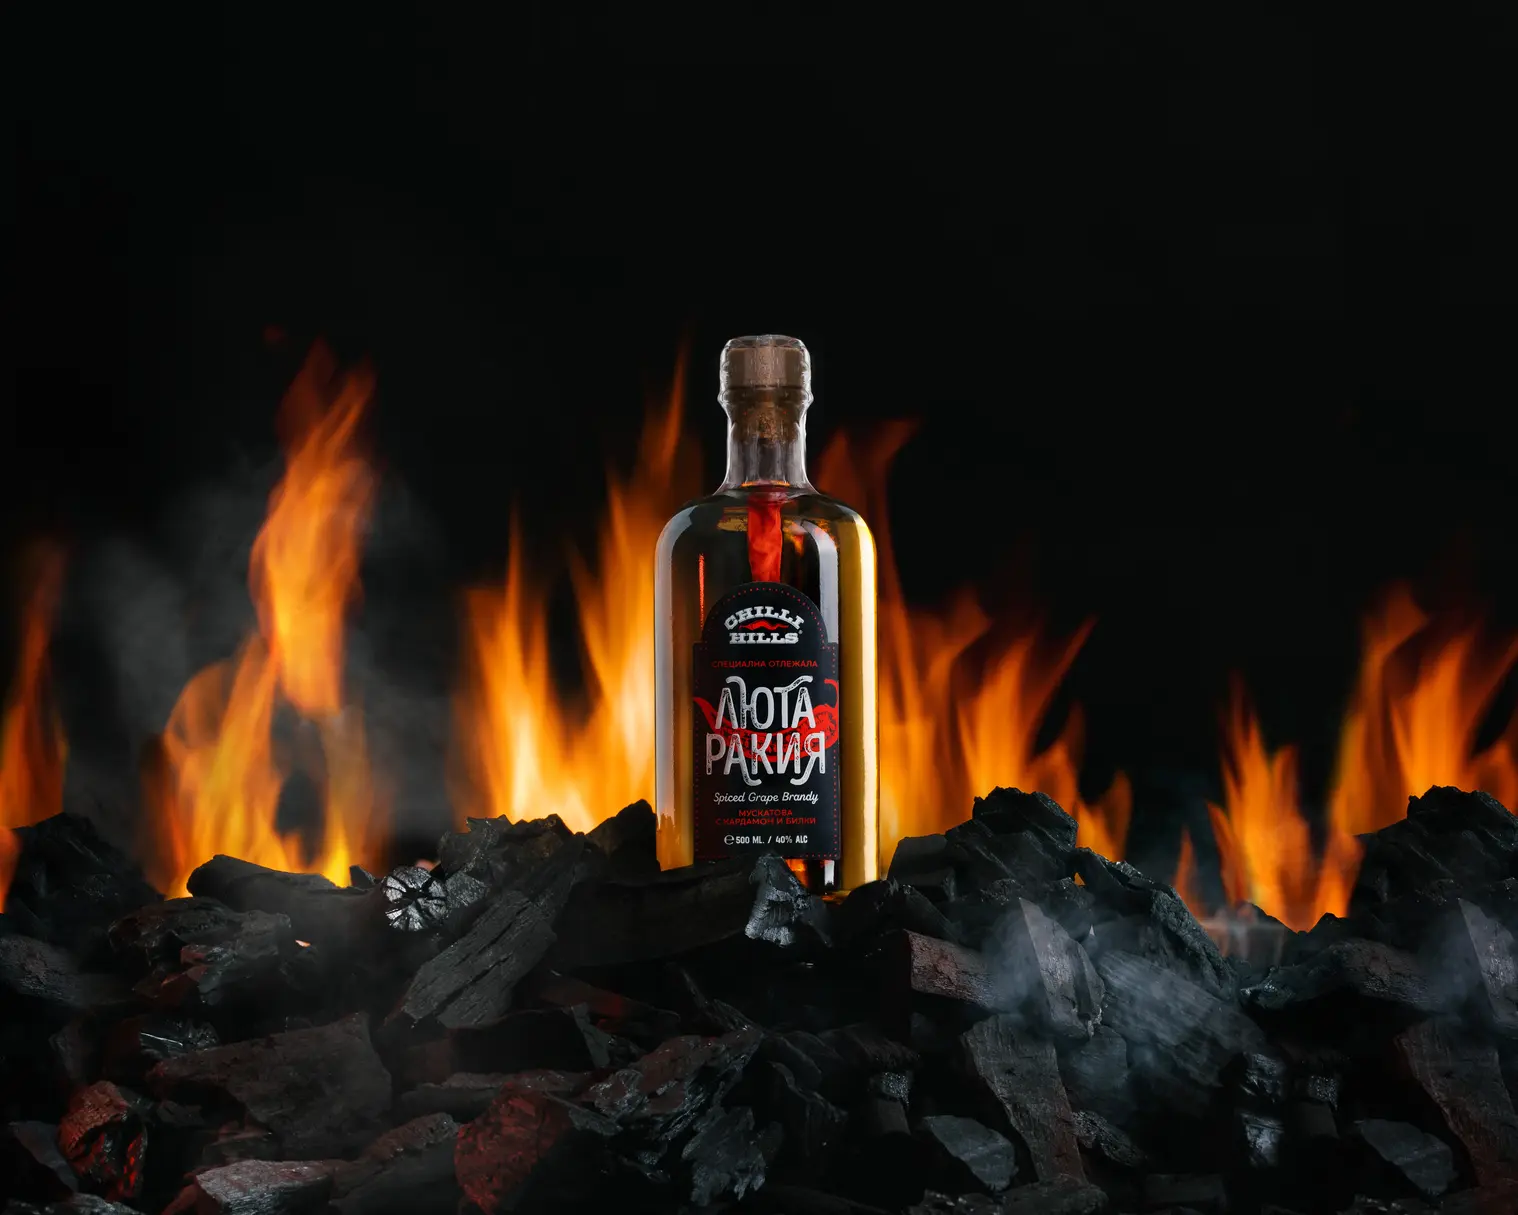 Chilli Hills - Luta Rakia set on fire A bottle of Chilli Hills Rakia sits on smoldering coals. Smoke is visible near the bottle on the right in the foreground. Behind the bottle is a fire, which also shines through a transparent bottle. Pepper is visible inside the bottle.